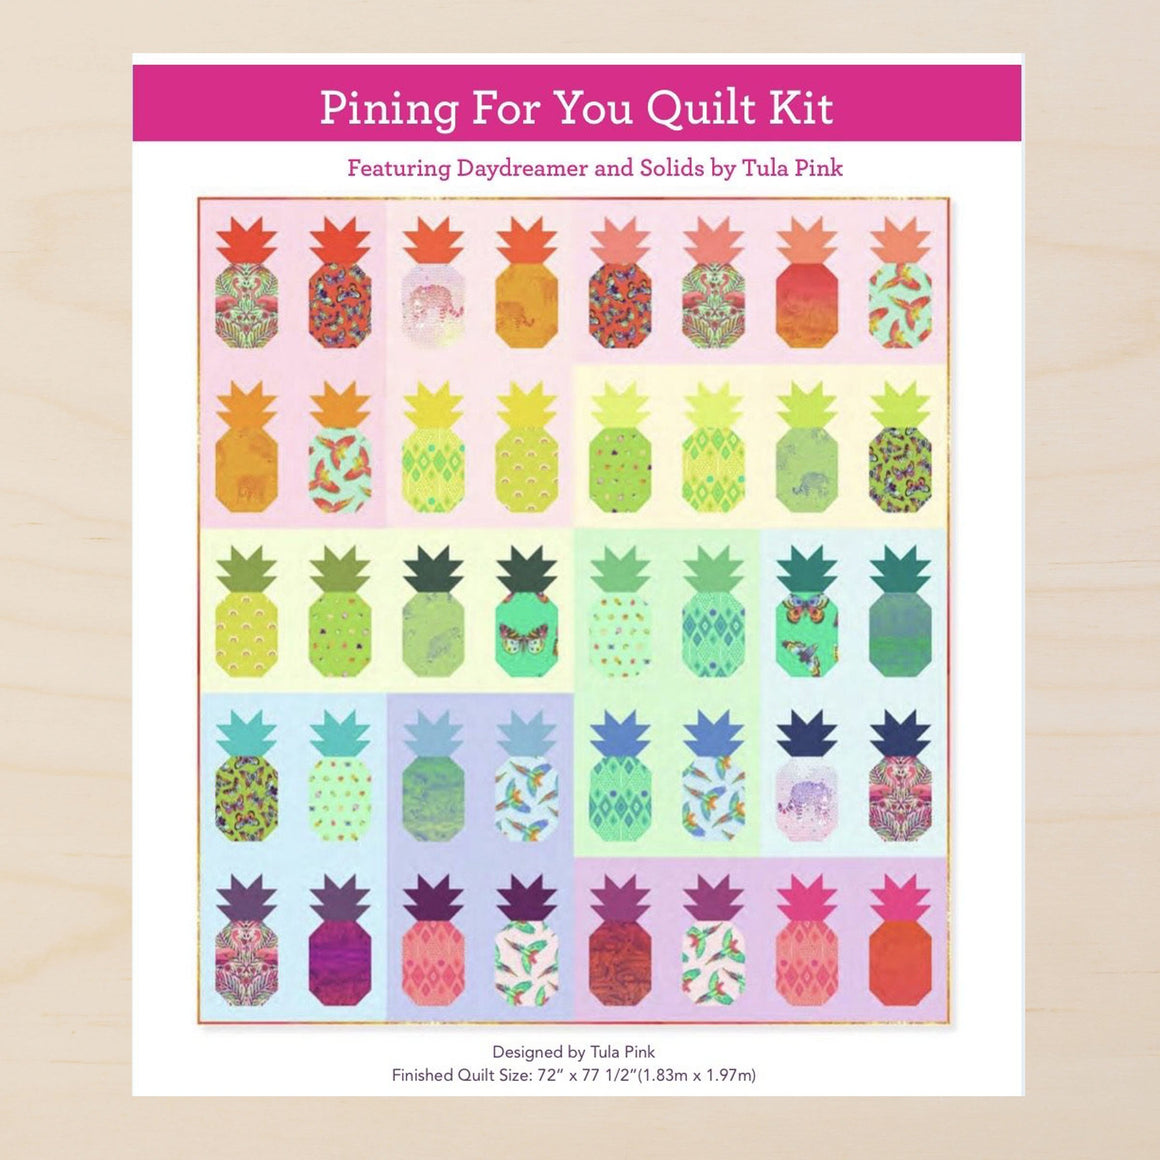 Pining For You Quilt Kit